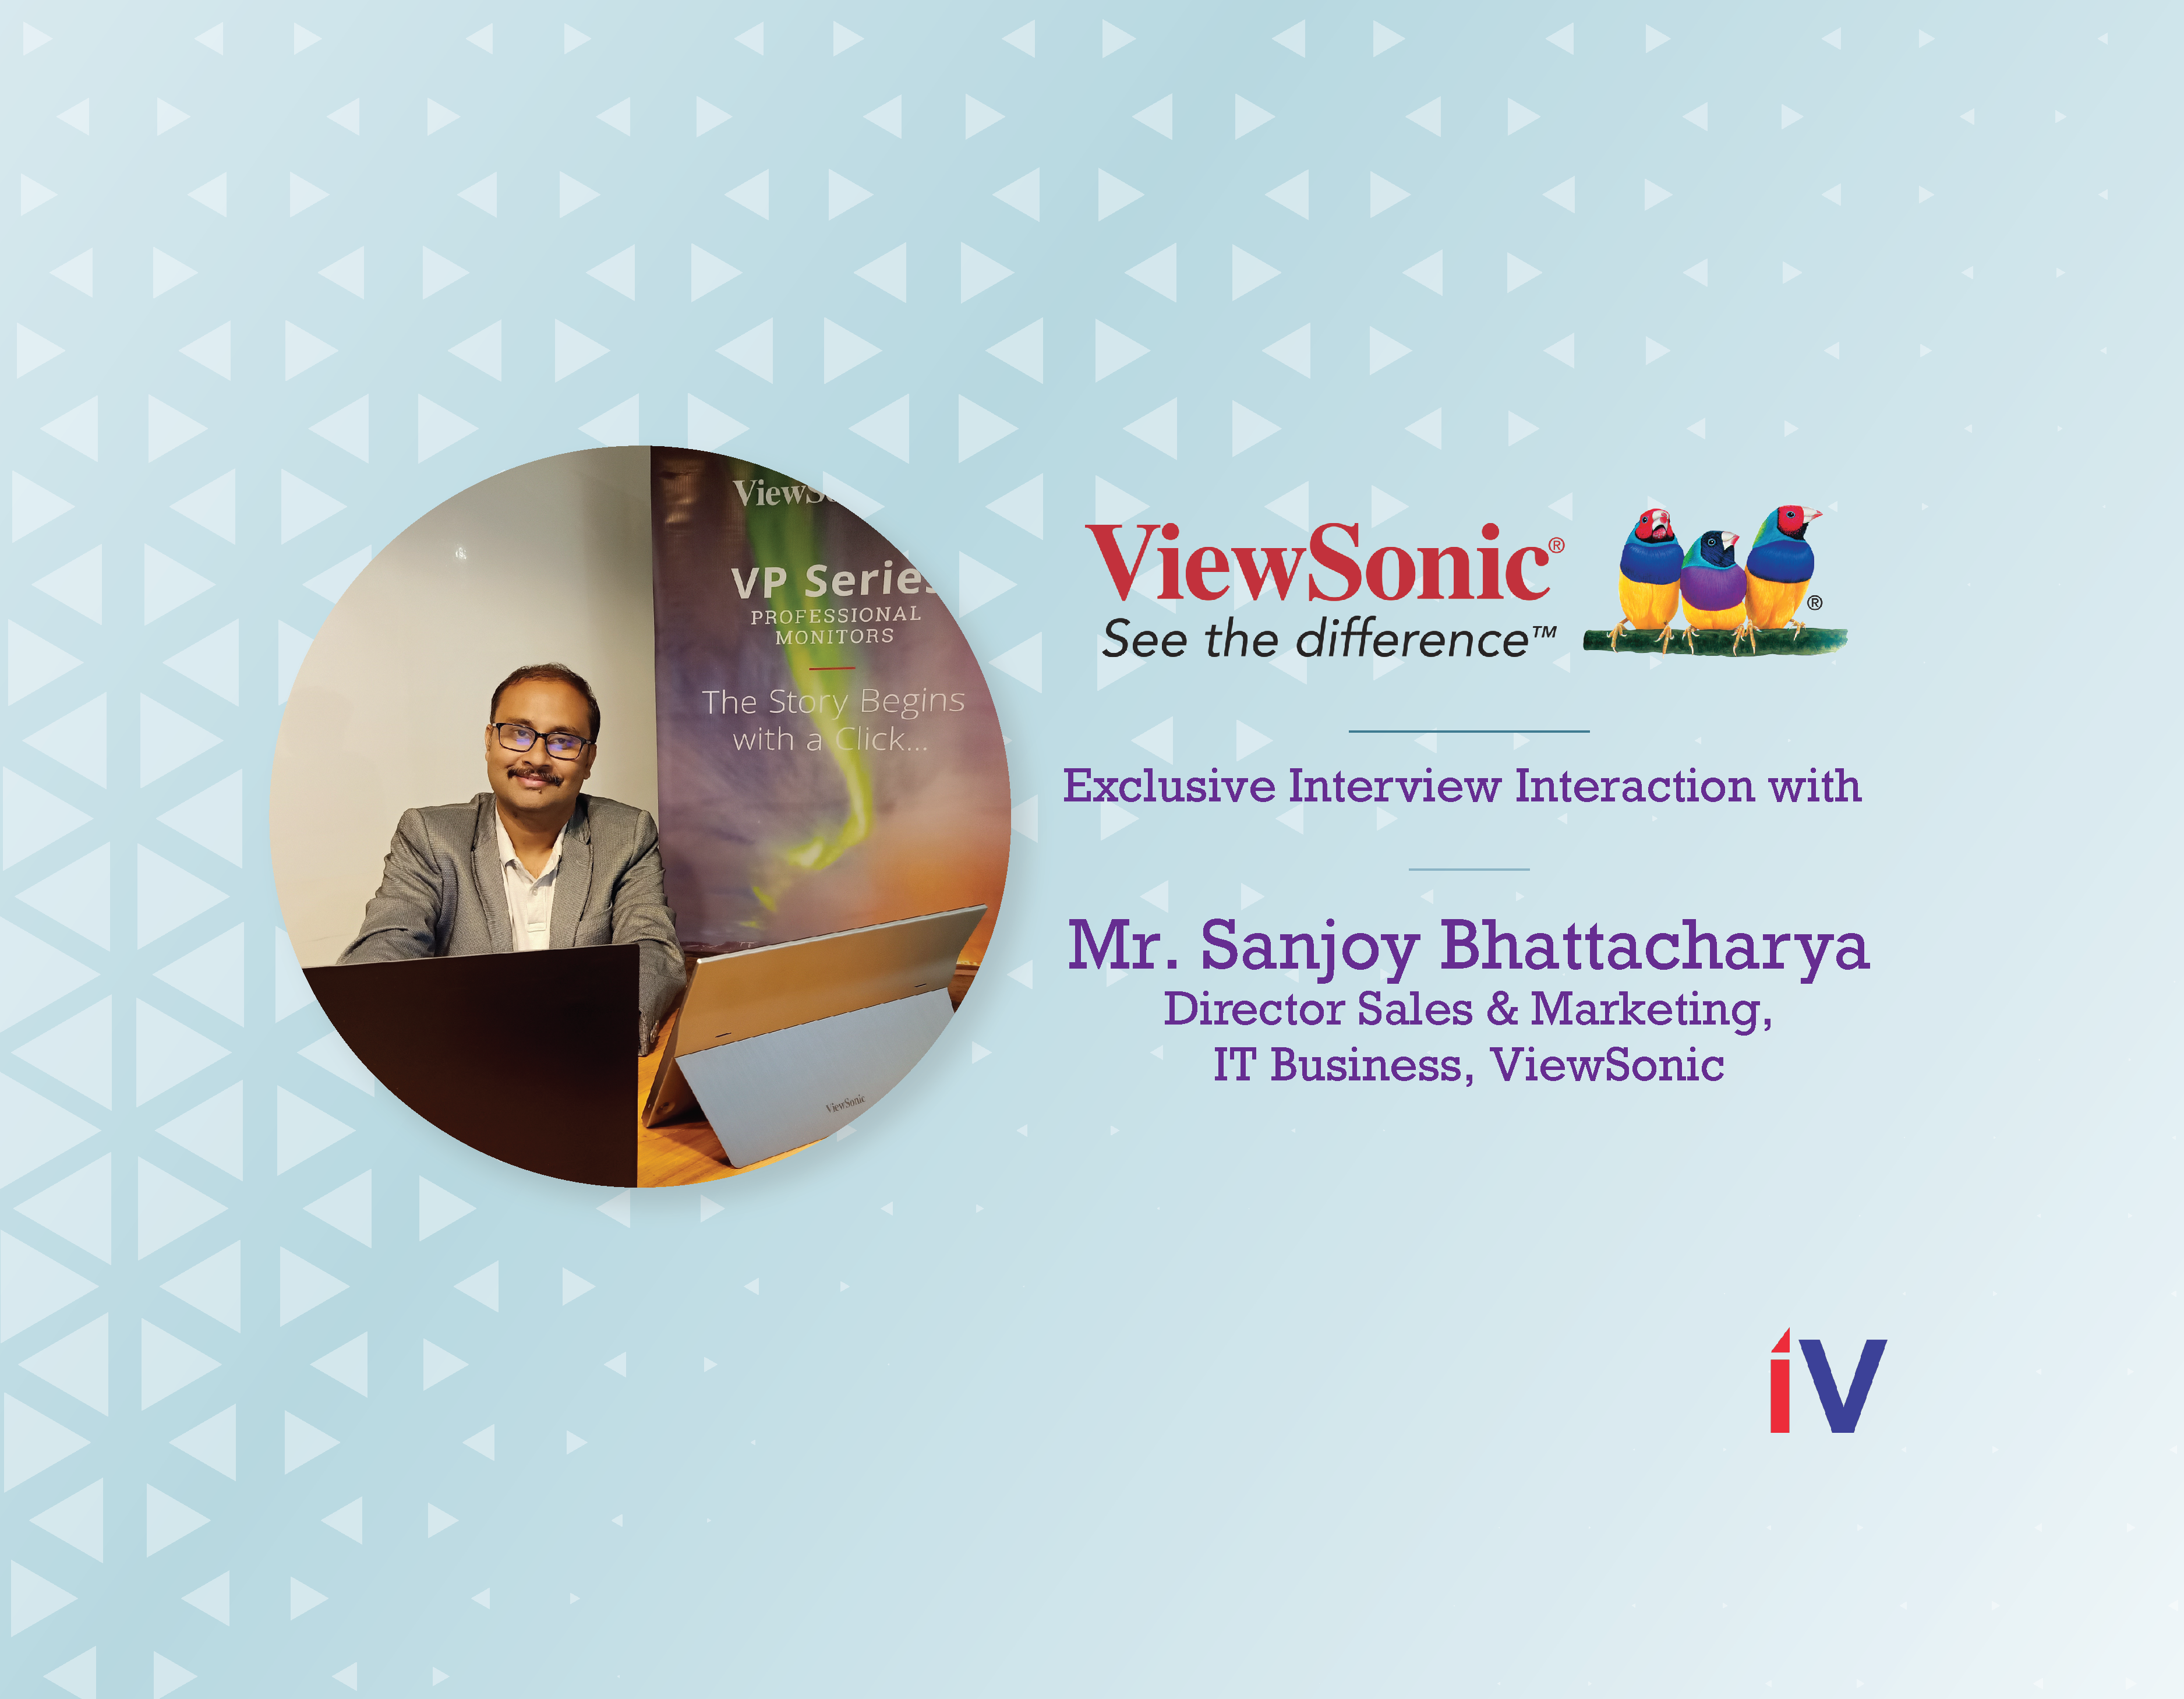 "ViewSonic stands rightly by its tagline of ‘See the Difference’ by bringing an exclusive and fine range of products to the Indian market." - Mr. Sanjoy Bhattacharya, Director Sales & Marketing, IT Business, ViewSonic